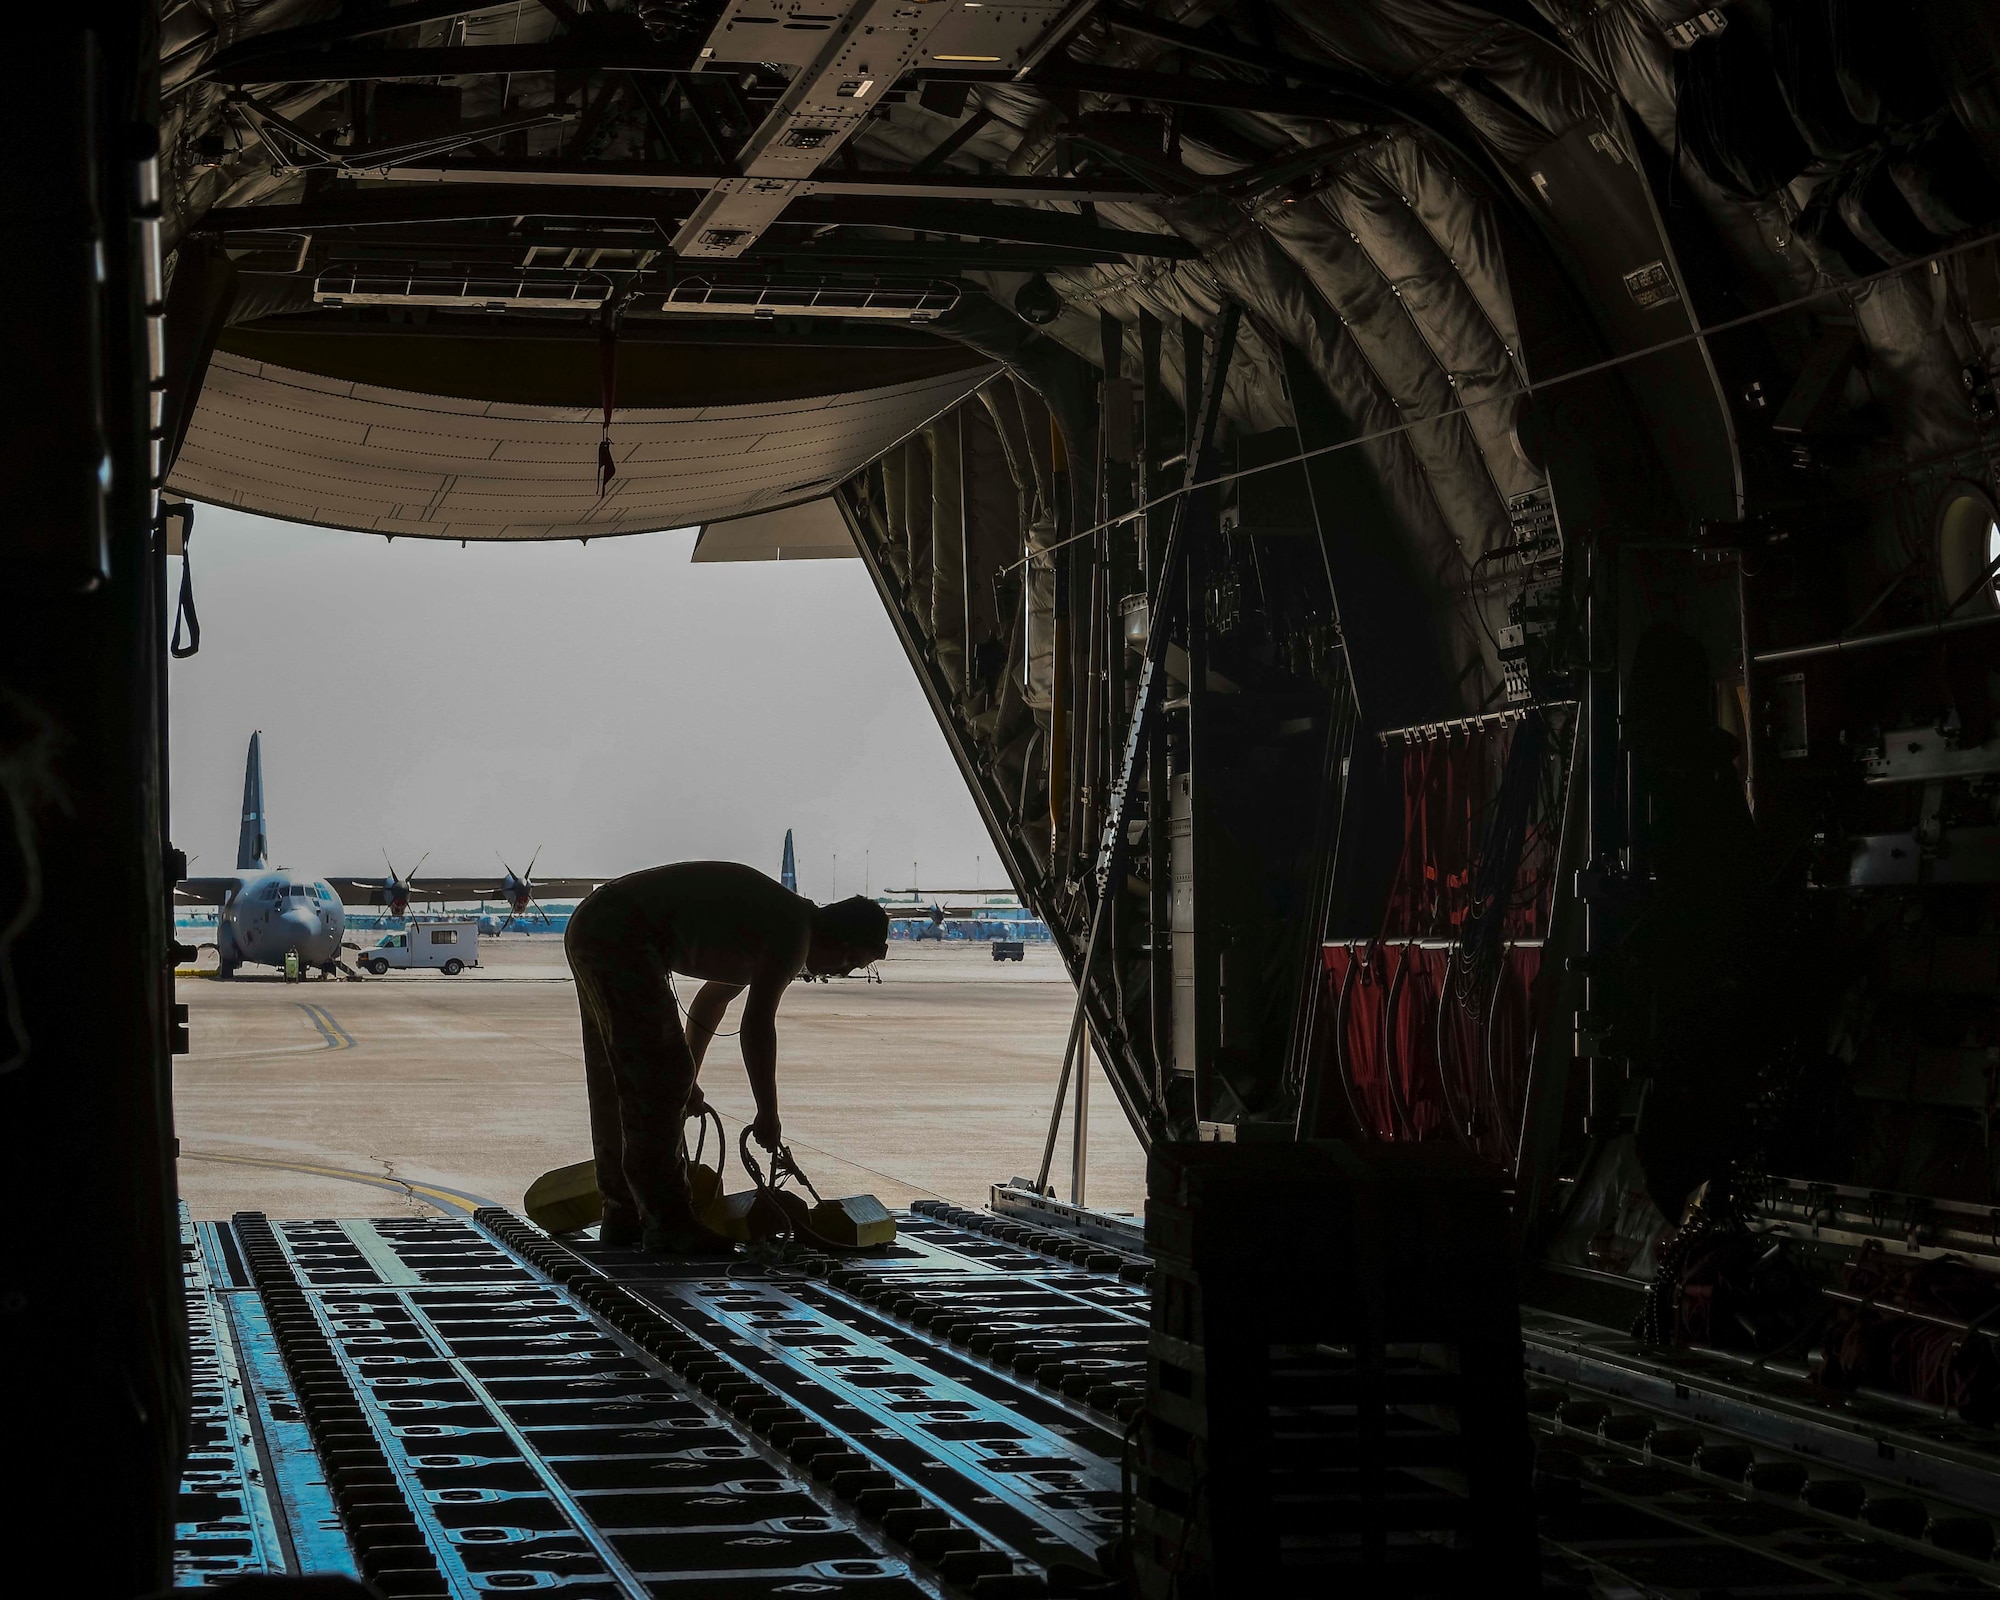 A U.S. Air Force loadmaster prepares a C-130J Super Hercules from Little Rock Air Force Base, Arkansas, for flight during a Joint Forcible Entry exercise near Las Vegas, June 6, 2020. More than 20 C-130Js and C-17 Globemaster IIIs flew in formation during the U.S. Air Force Weapons School’s Joint Forcible Entry exercise with numerous other aircraft from across the Air Force. (U.S. Air Force photo by Senior Airman Kristine M. Gruwell)